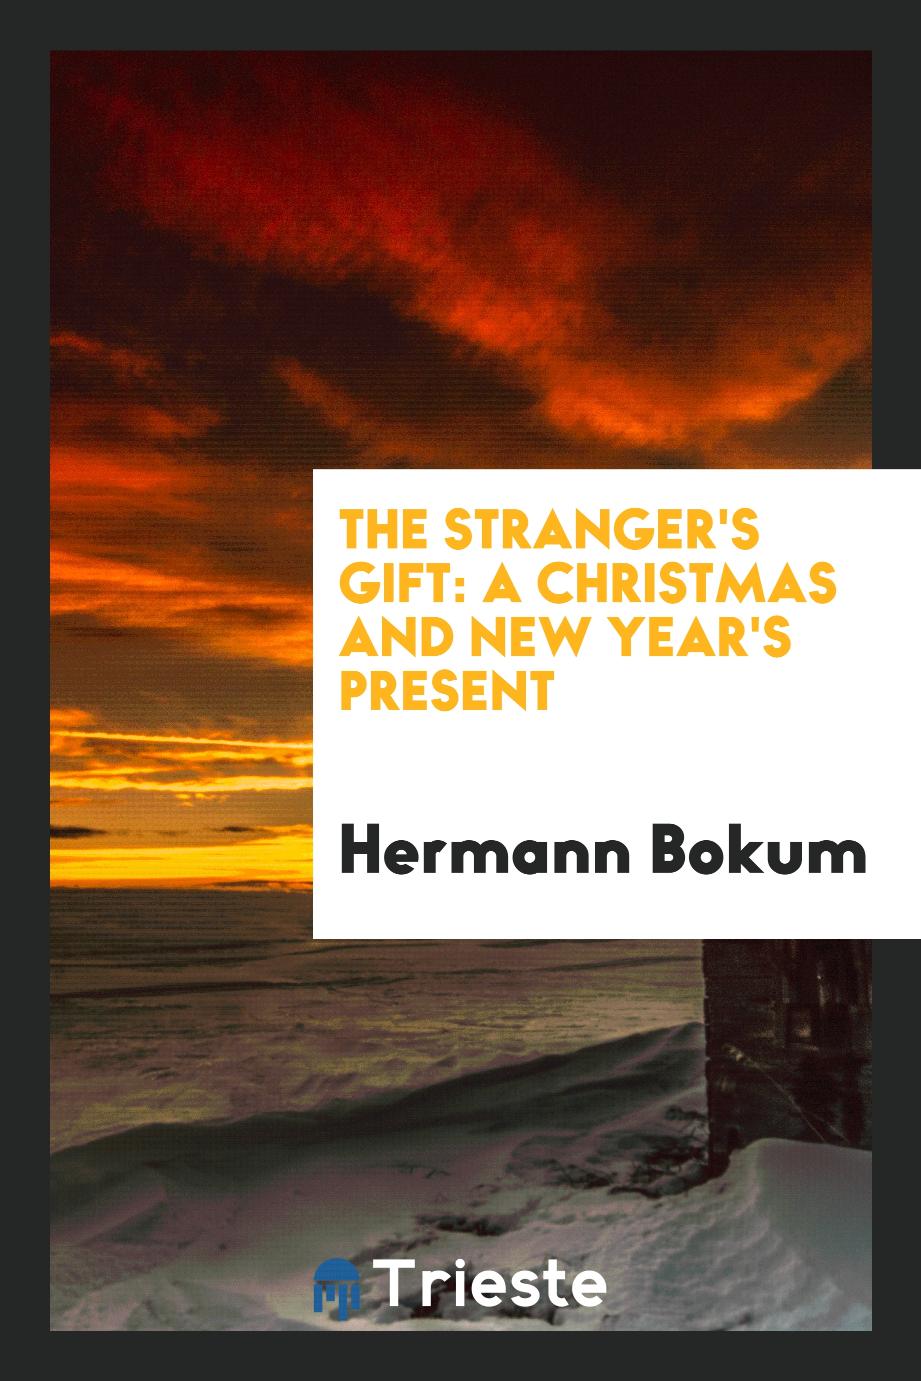 The Stranger's Gift: A Christmas and New Year's Present